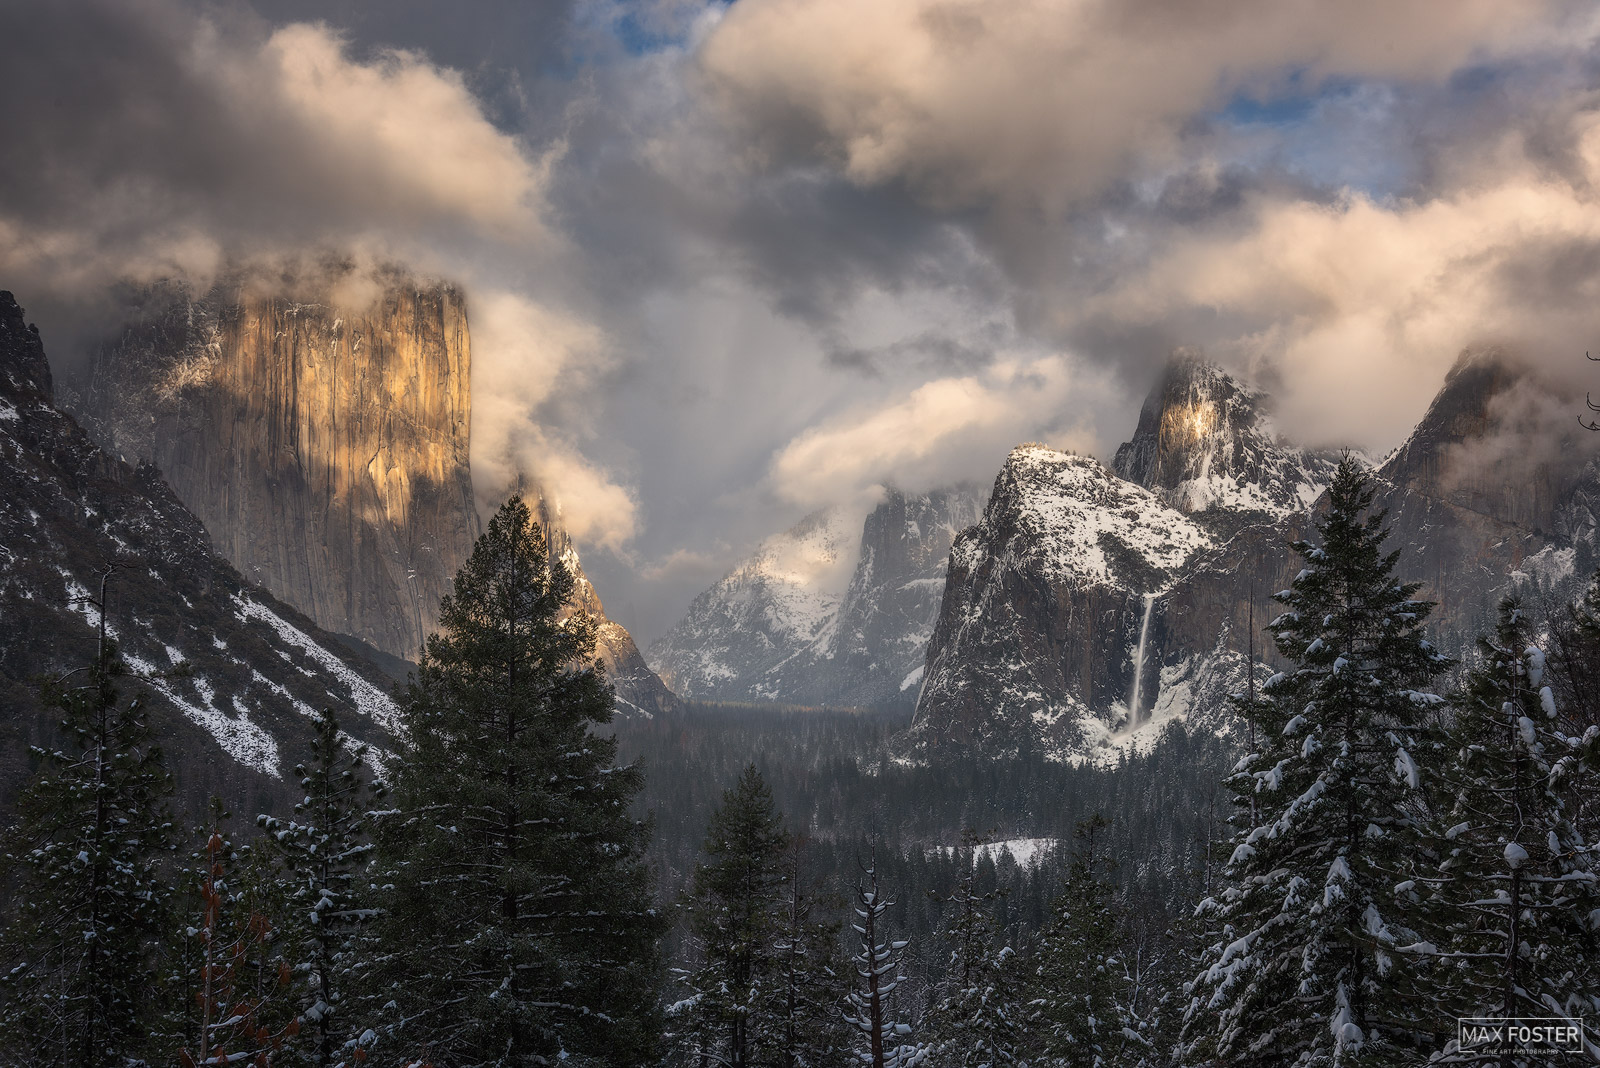 Majestic Valley, Tunnel View, Yosemite National Park. Photo © copyright by Max Foster